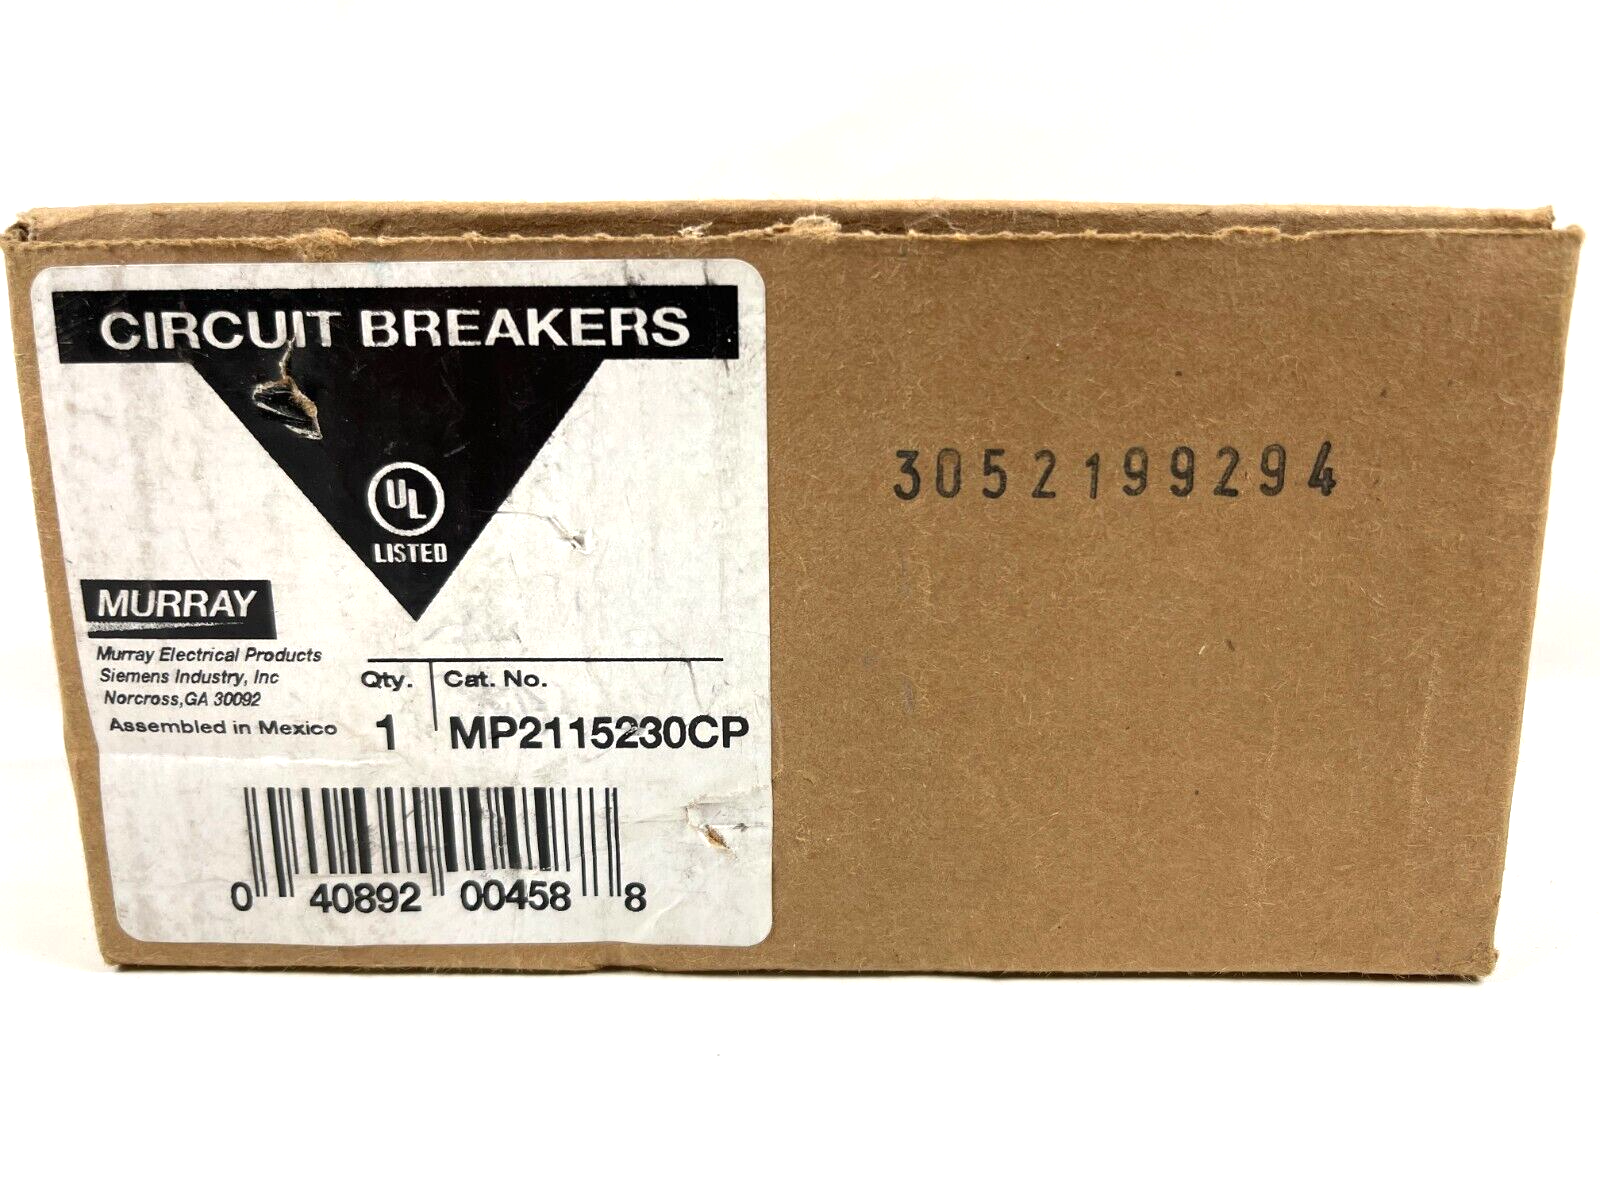 New Murray MP2115230CP Breakers - Double Pole 30 & Two Single Pole 15 120/240 V - $27.71